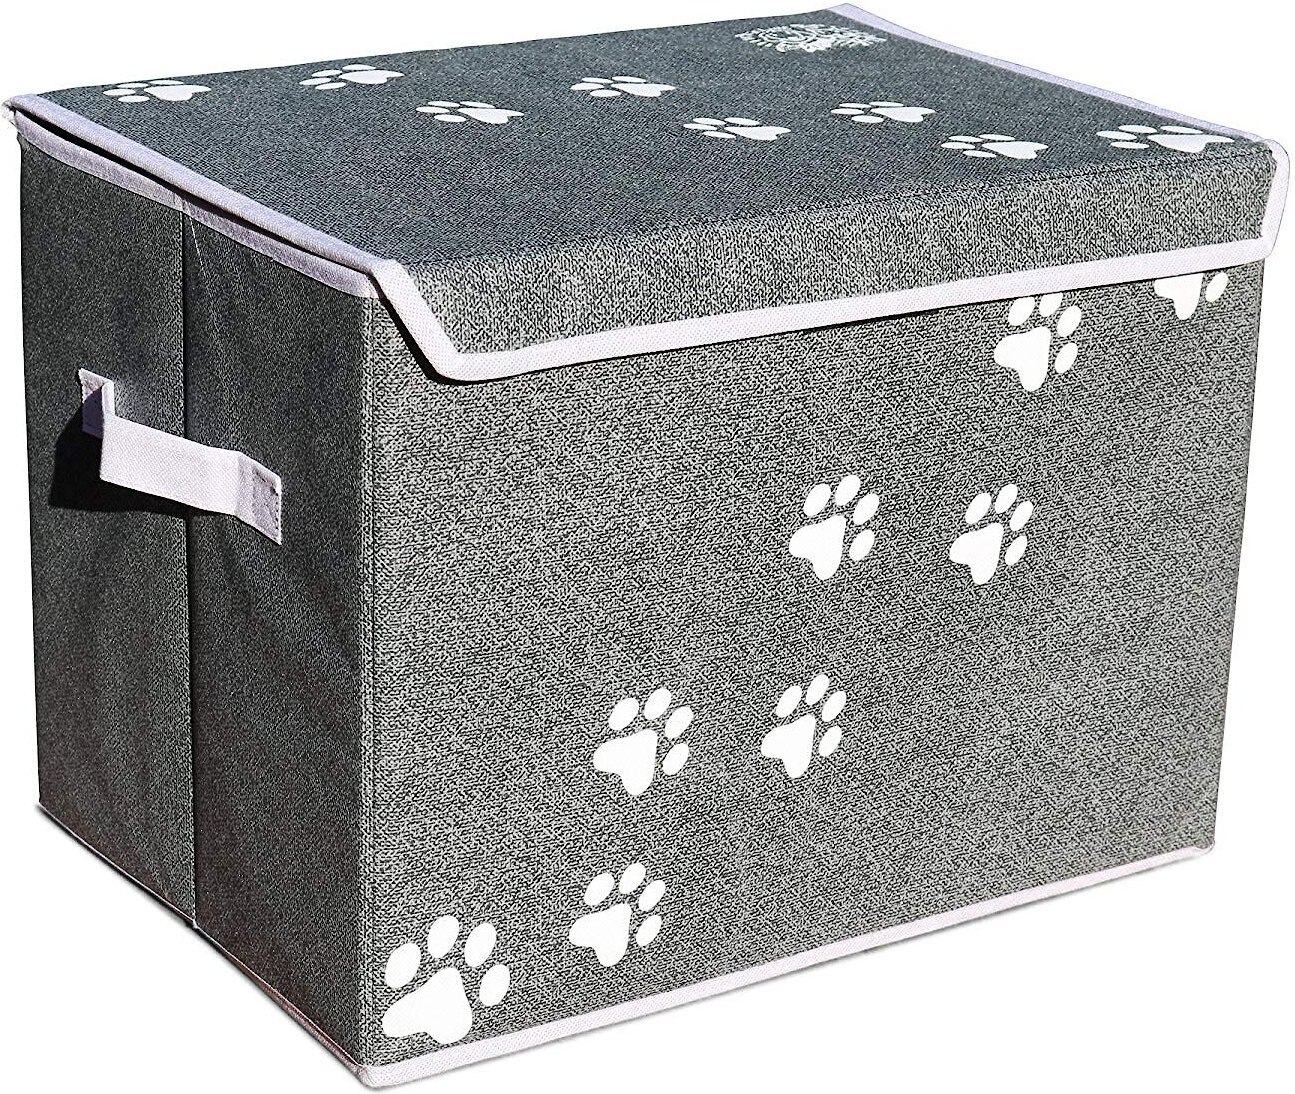 Cat Toy Bin with Cover Collapsible Folding Octagon Decorative Storage Container 